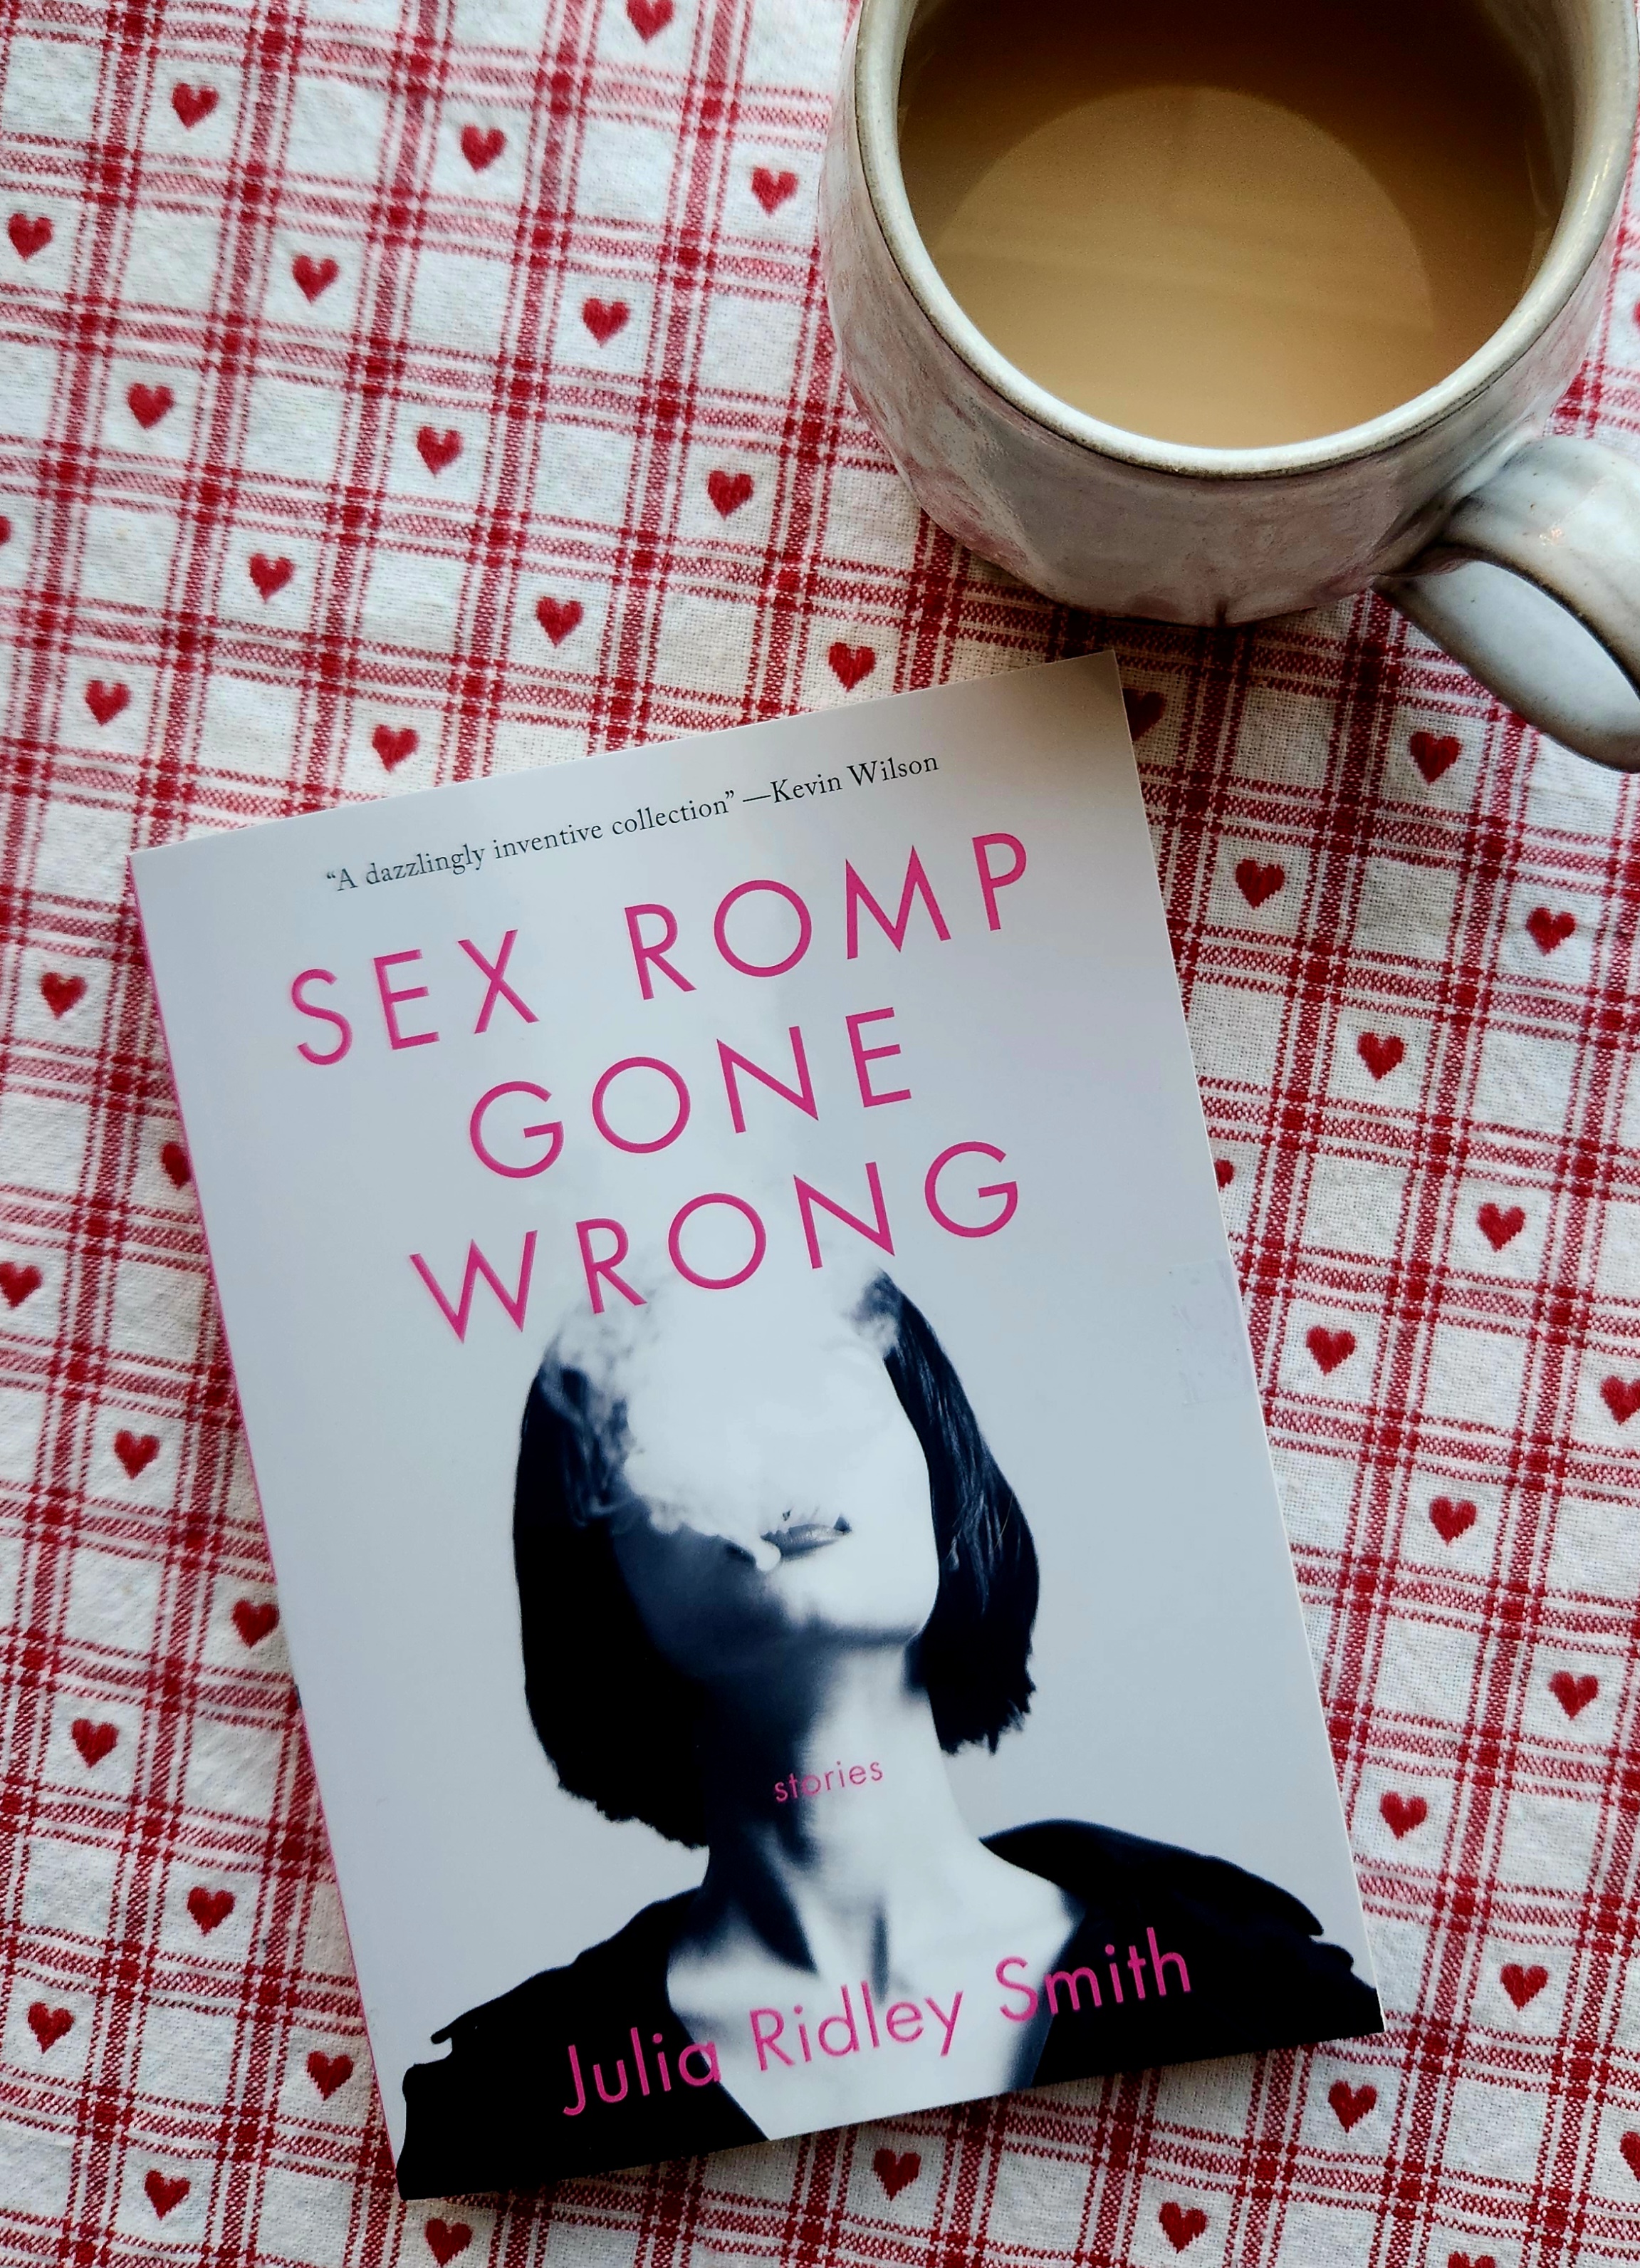 book cover of sex romp gone wrong by julia ridley smith, and a cup of tea